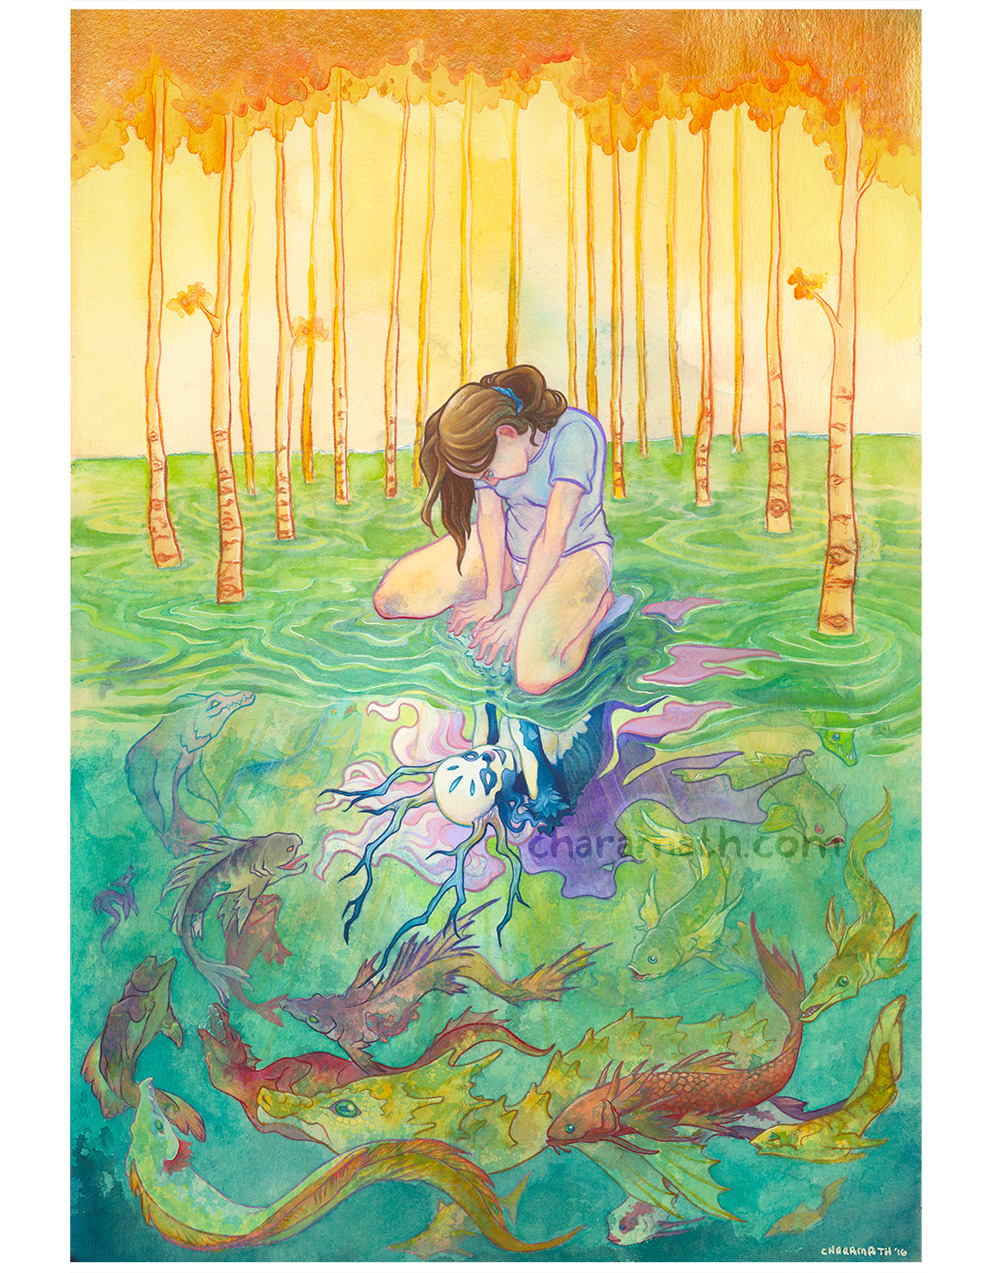 ‘Reflection’ Done in watercolors, gouache and inks. A personal piece. etsy patreon neatoshop teepublic